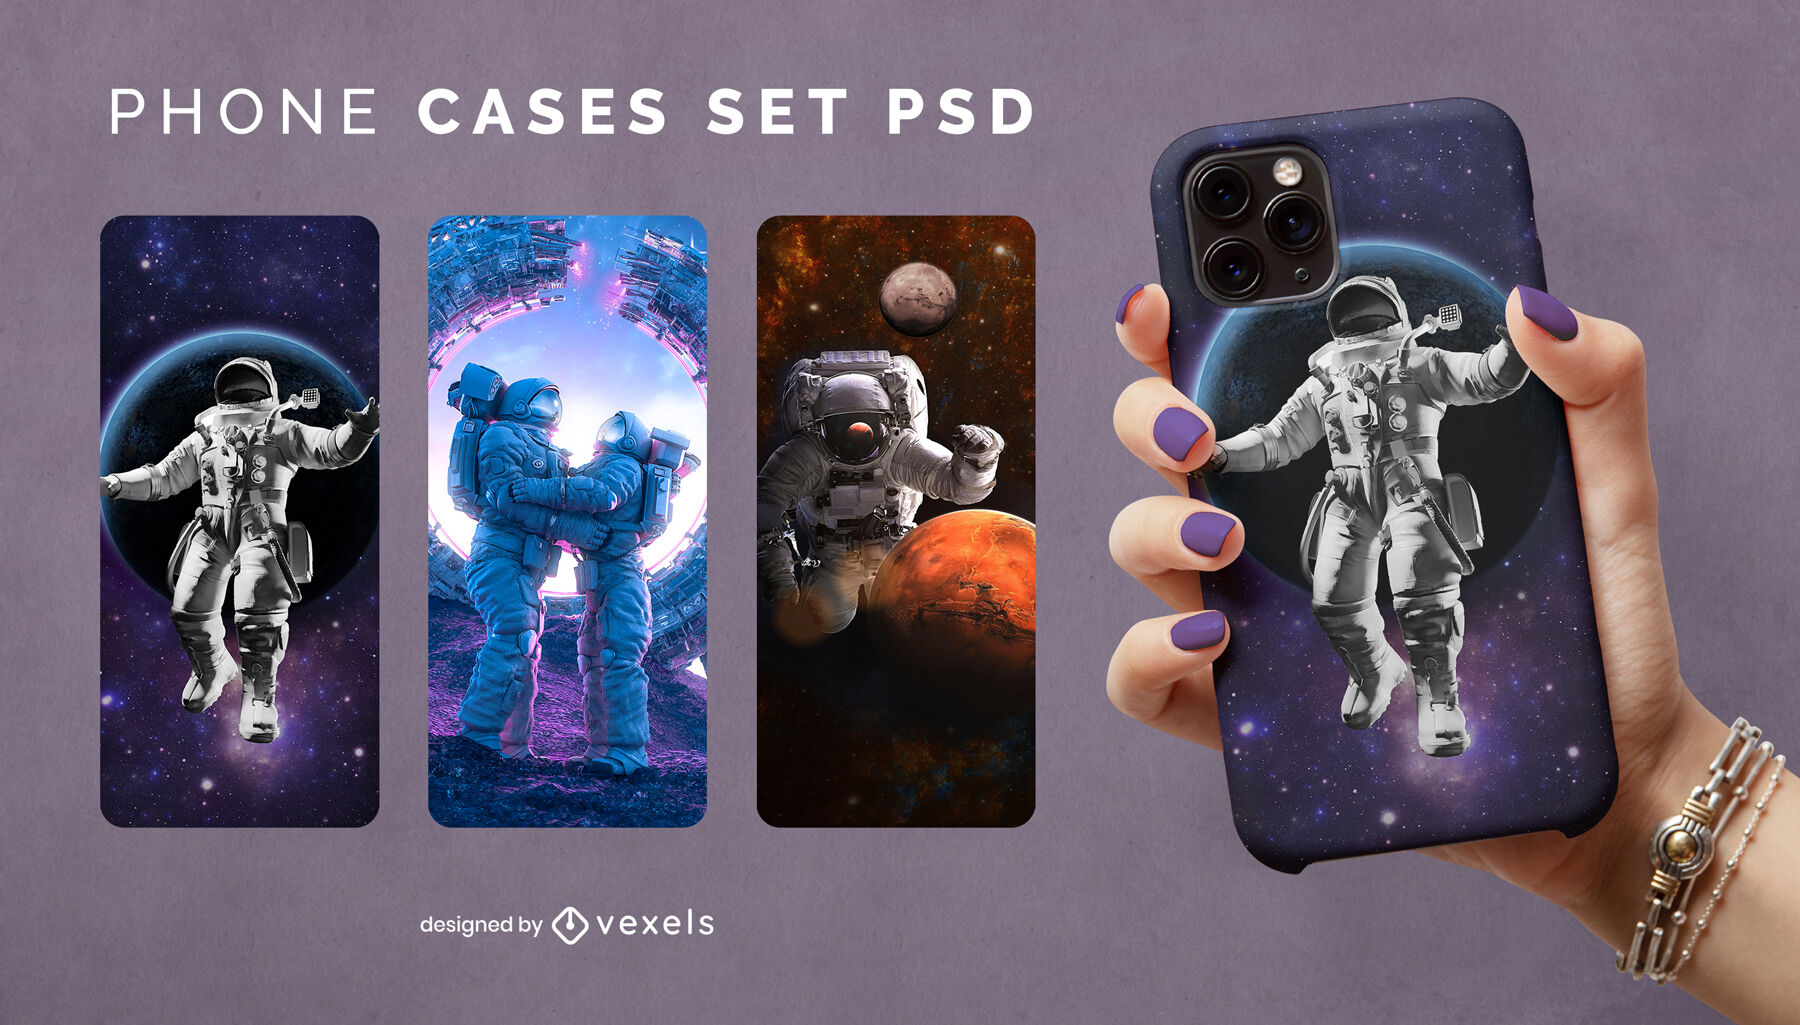 Astronauts floating in space phone case set